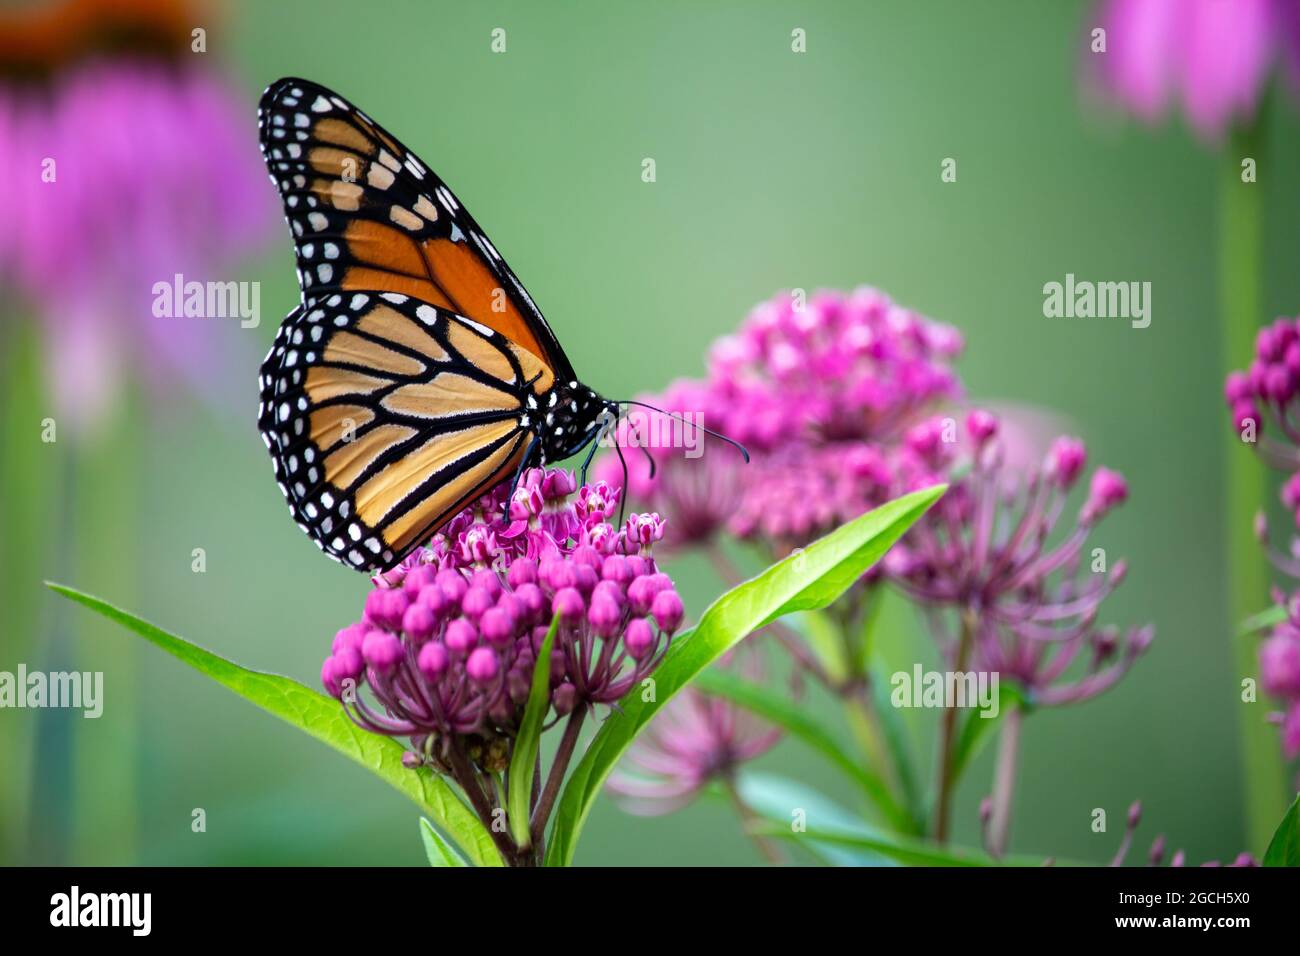 Macro view of a monarch butterfly feeding on rosy pink blossoms of a swamp milkweed plant (asclepias incarnata) with defocused background Stock Photo